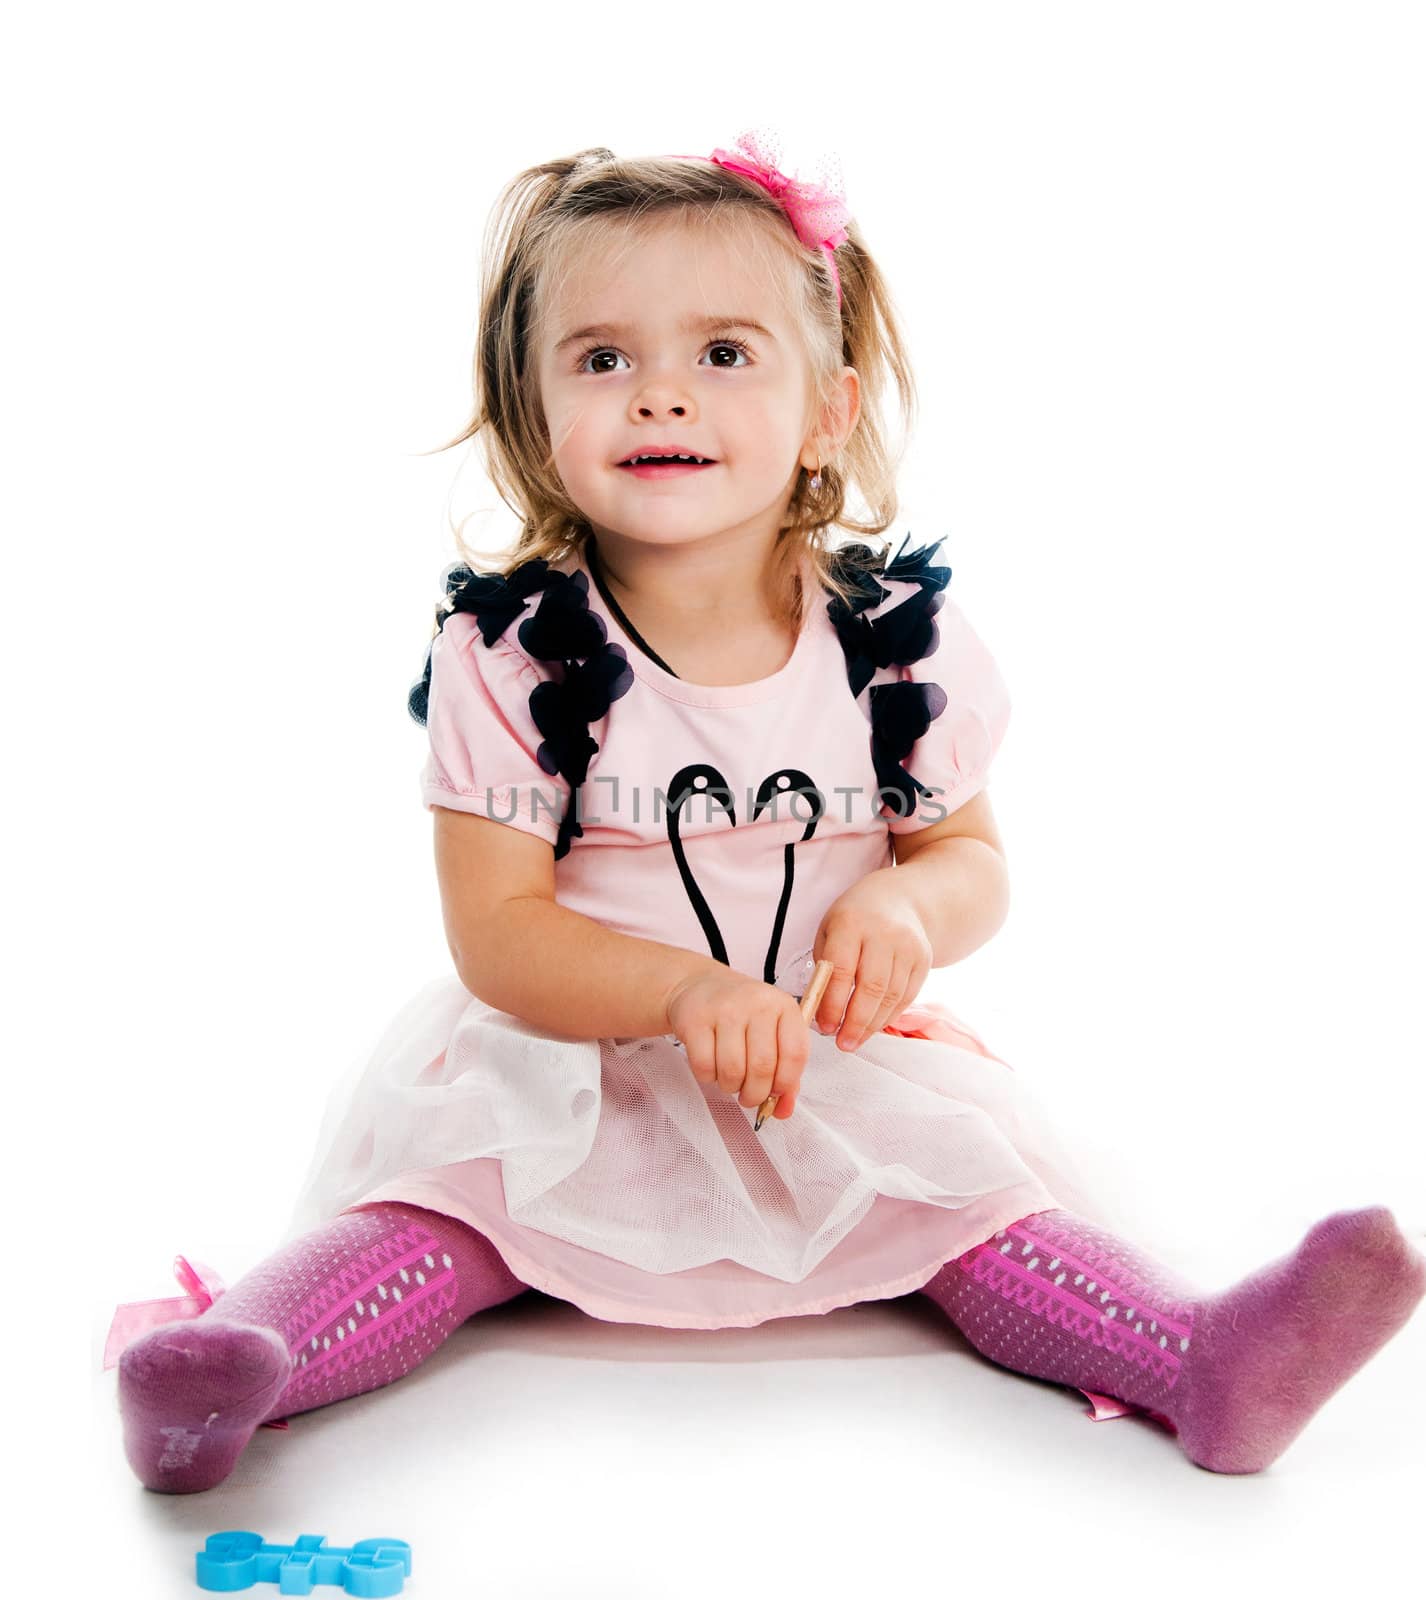 Portrait of a cute little girl sitting on floor, isolated over white